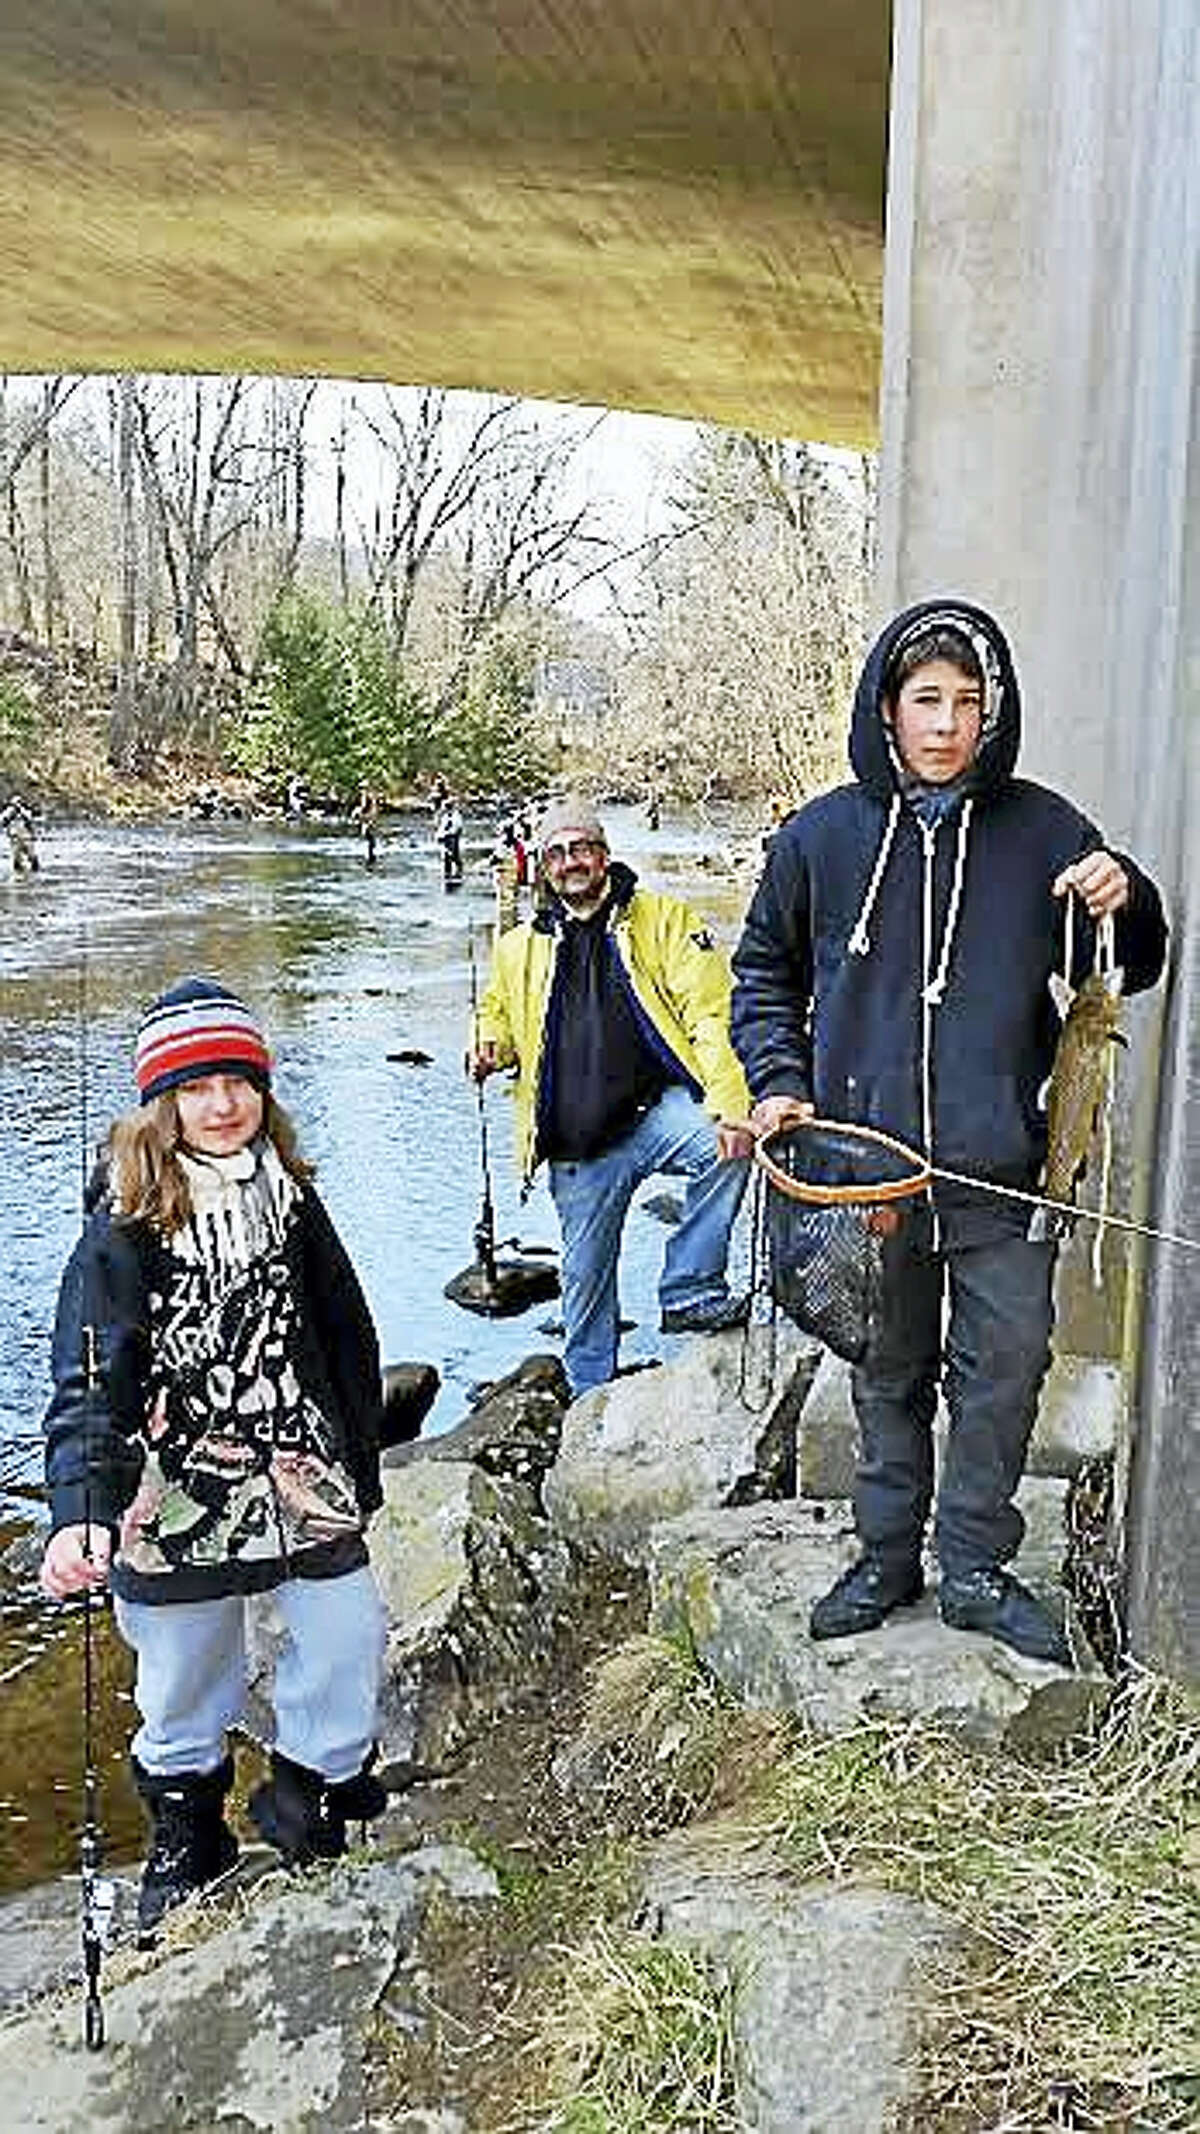 Azyda Lynt, 11, of Terryville; Derek Paplauskas of Terryville; and Robert Valentine, 16, of Waterbury participated in the 67th annual Riverton Fishing Derby on the West branch of the Farmington River near the Old Riverton Inn at 436 E. River Road in Riverton Saturday.